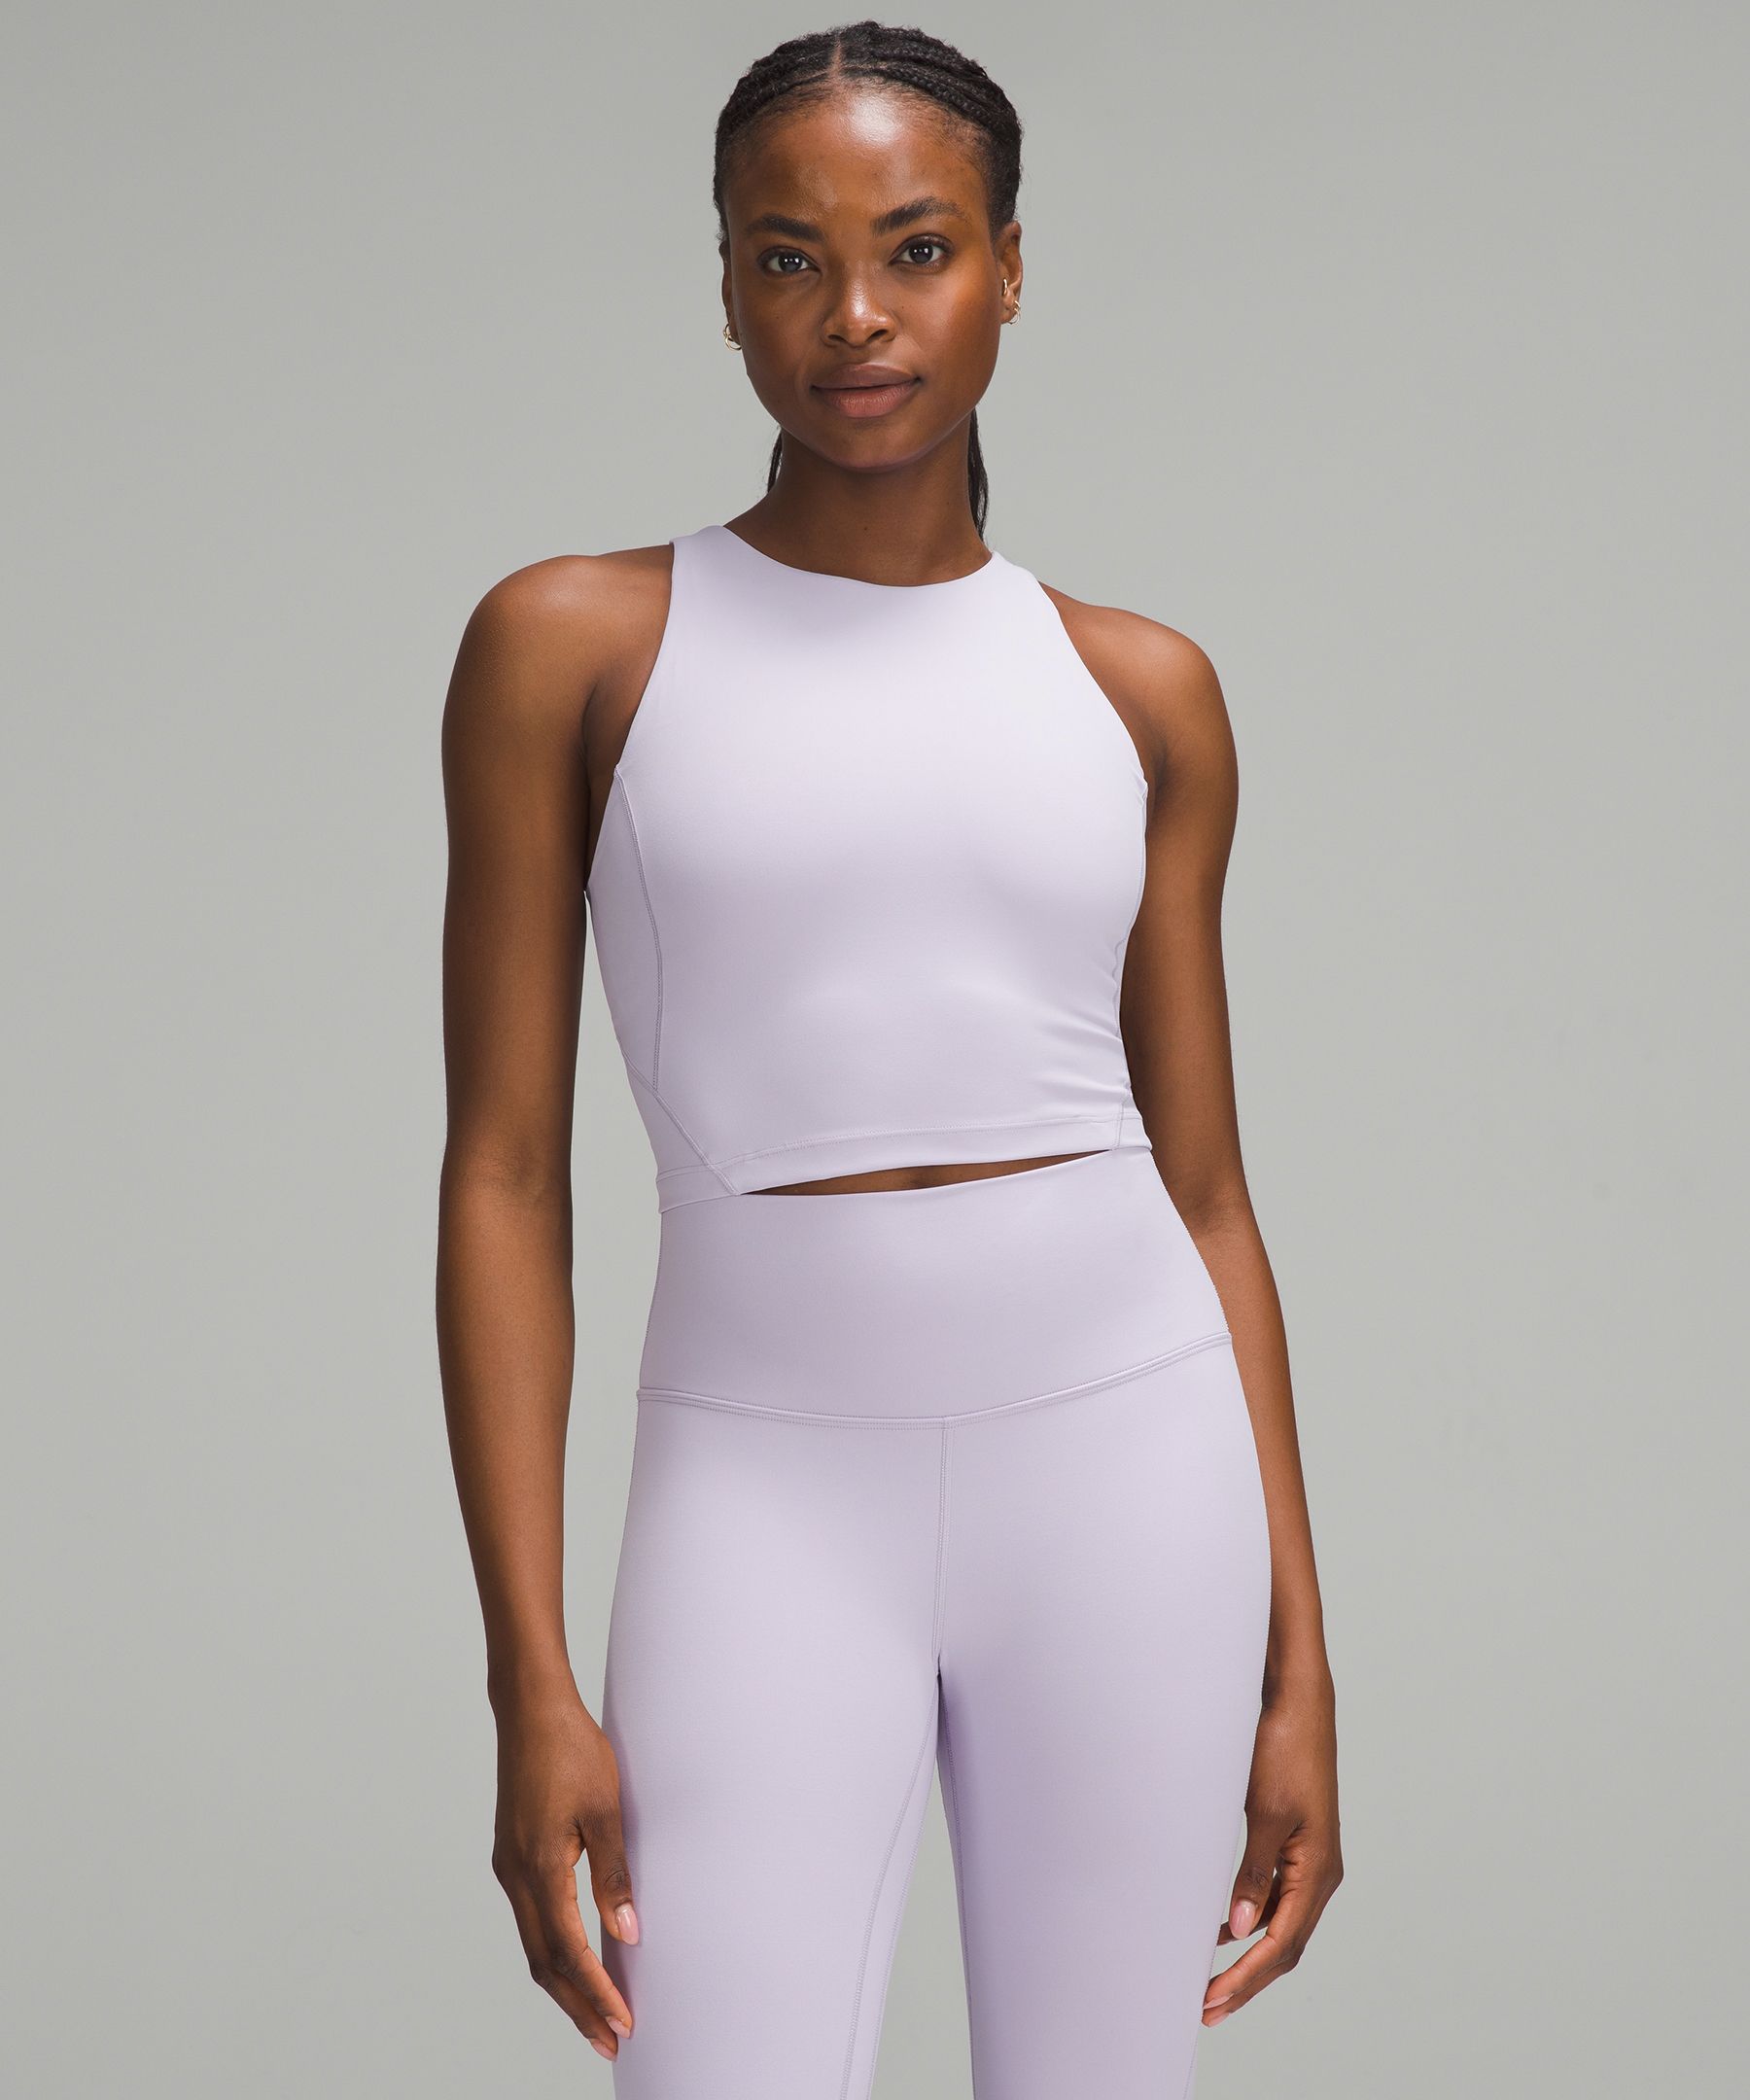 Lululemon Align Tank White Size 2 - $27 (65% Off Retail) - From Lina